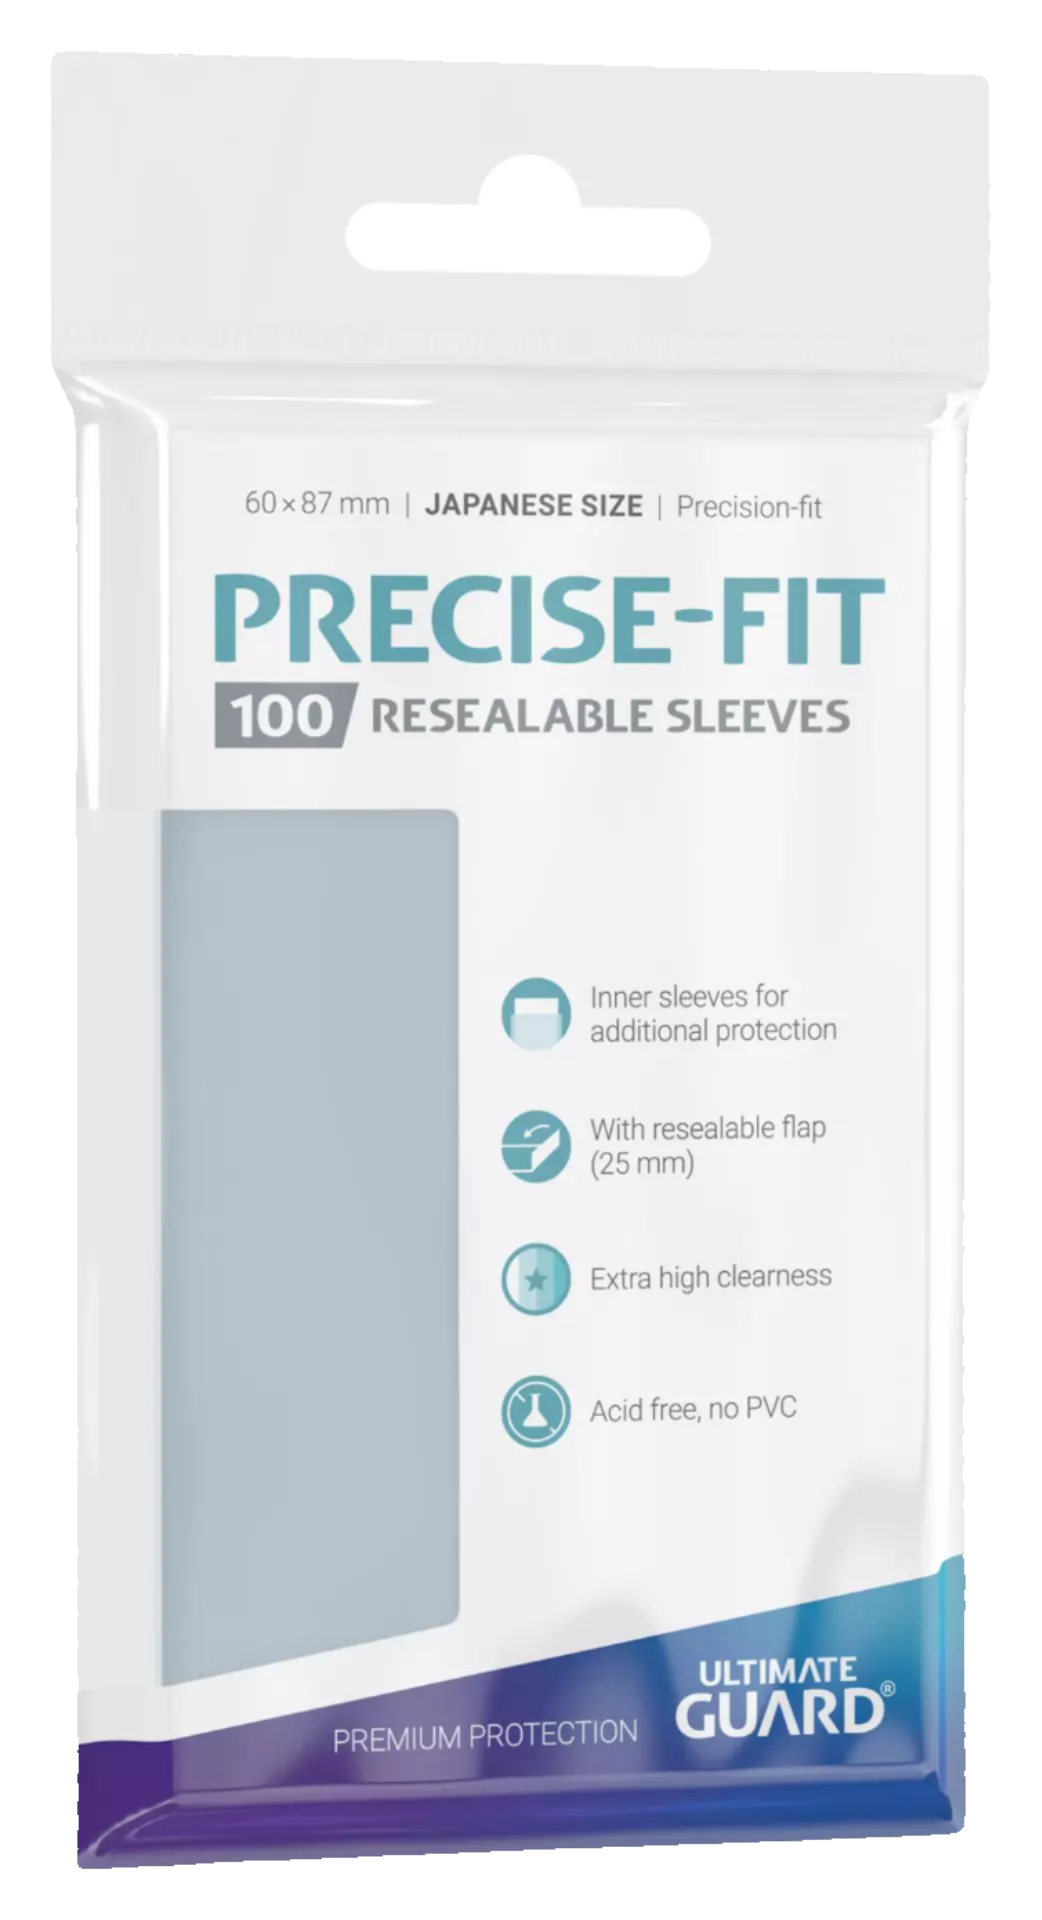 Ultimate Guard - Precise-Fit Sleeves - Japanese Size - Resealable - 100pk